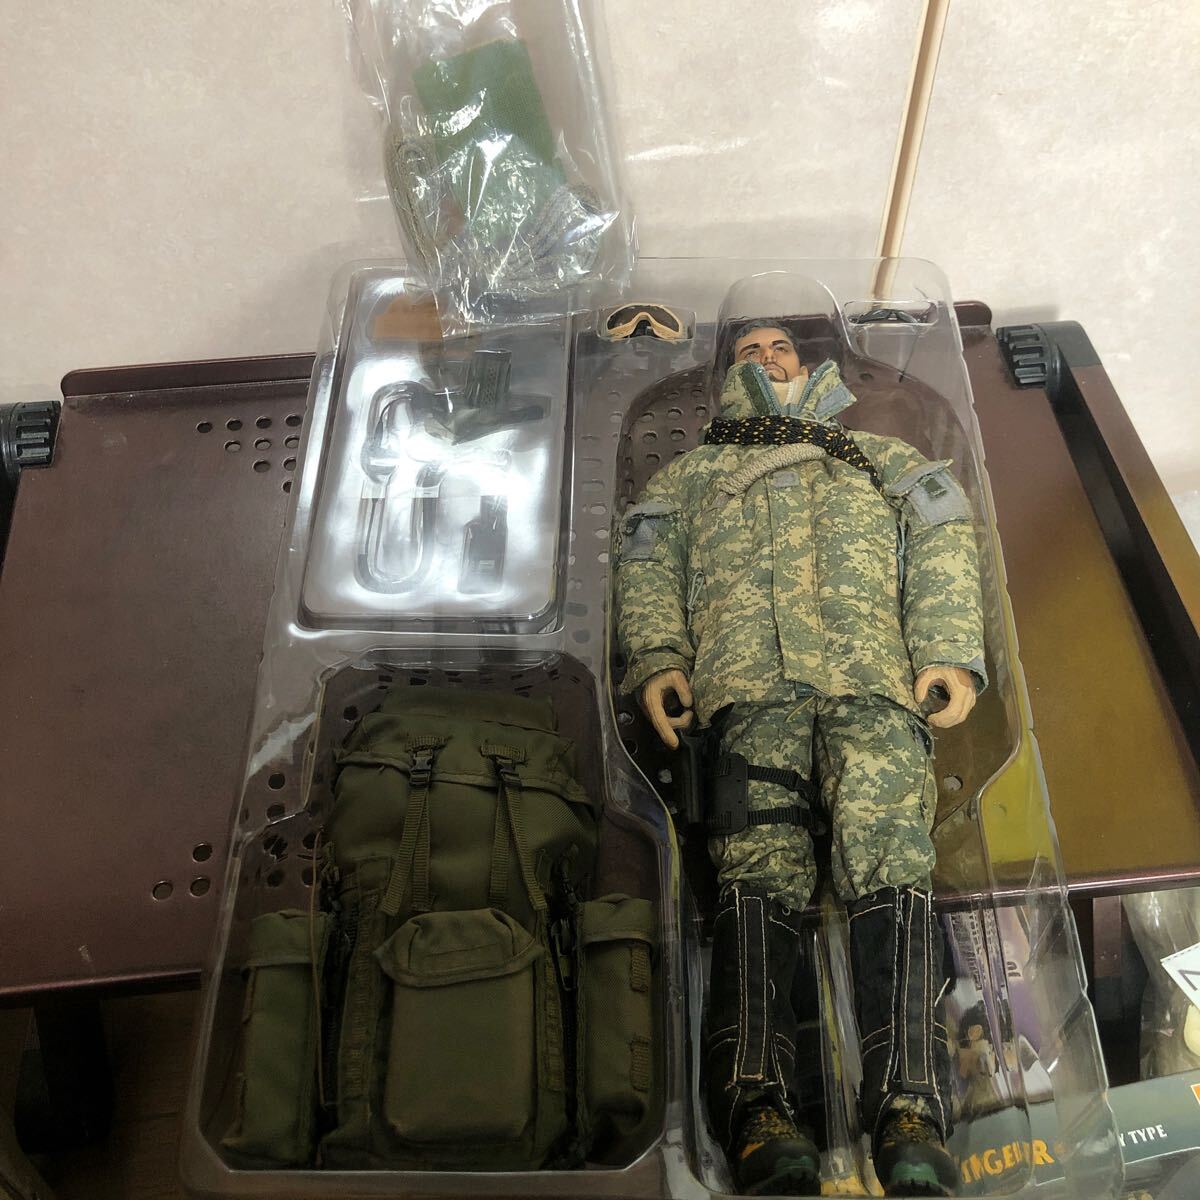 770 Hot toys ( hot toys ) 1/6 action figure MOUNTAIN OPS SNIPER ACU VERSIONsnaipa- military FULLY mountains model final product 